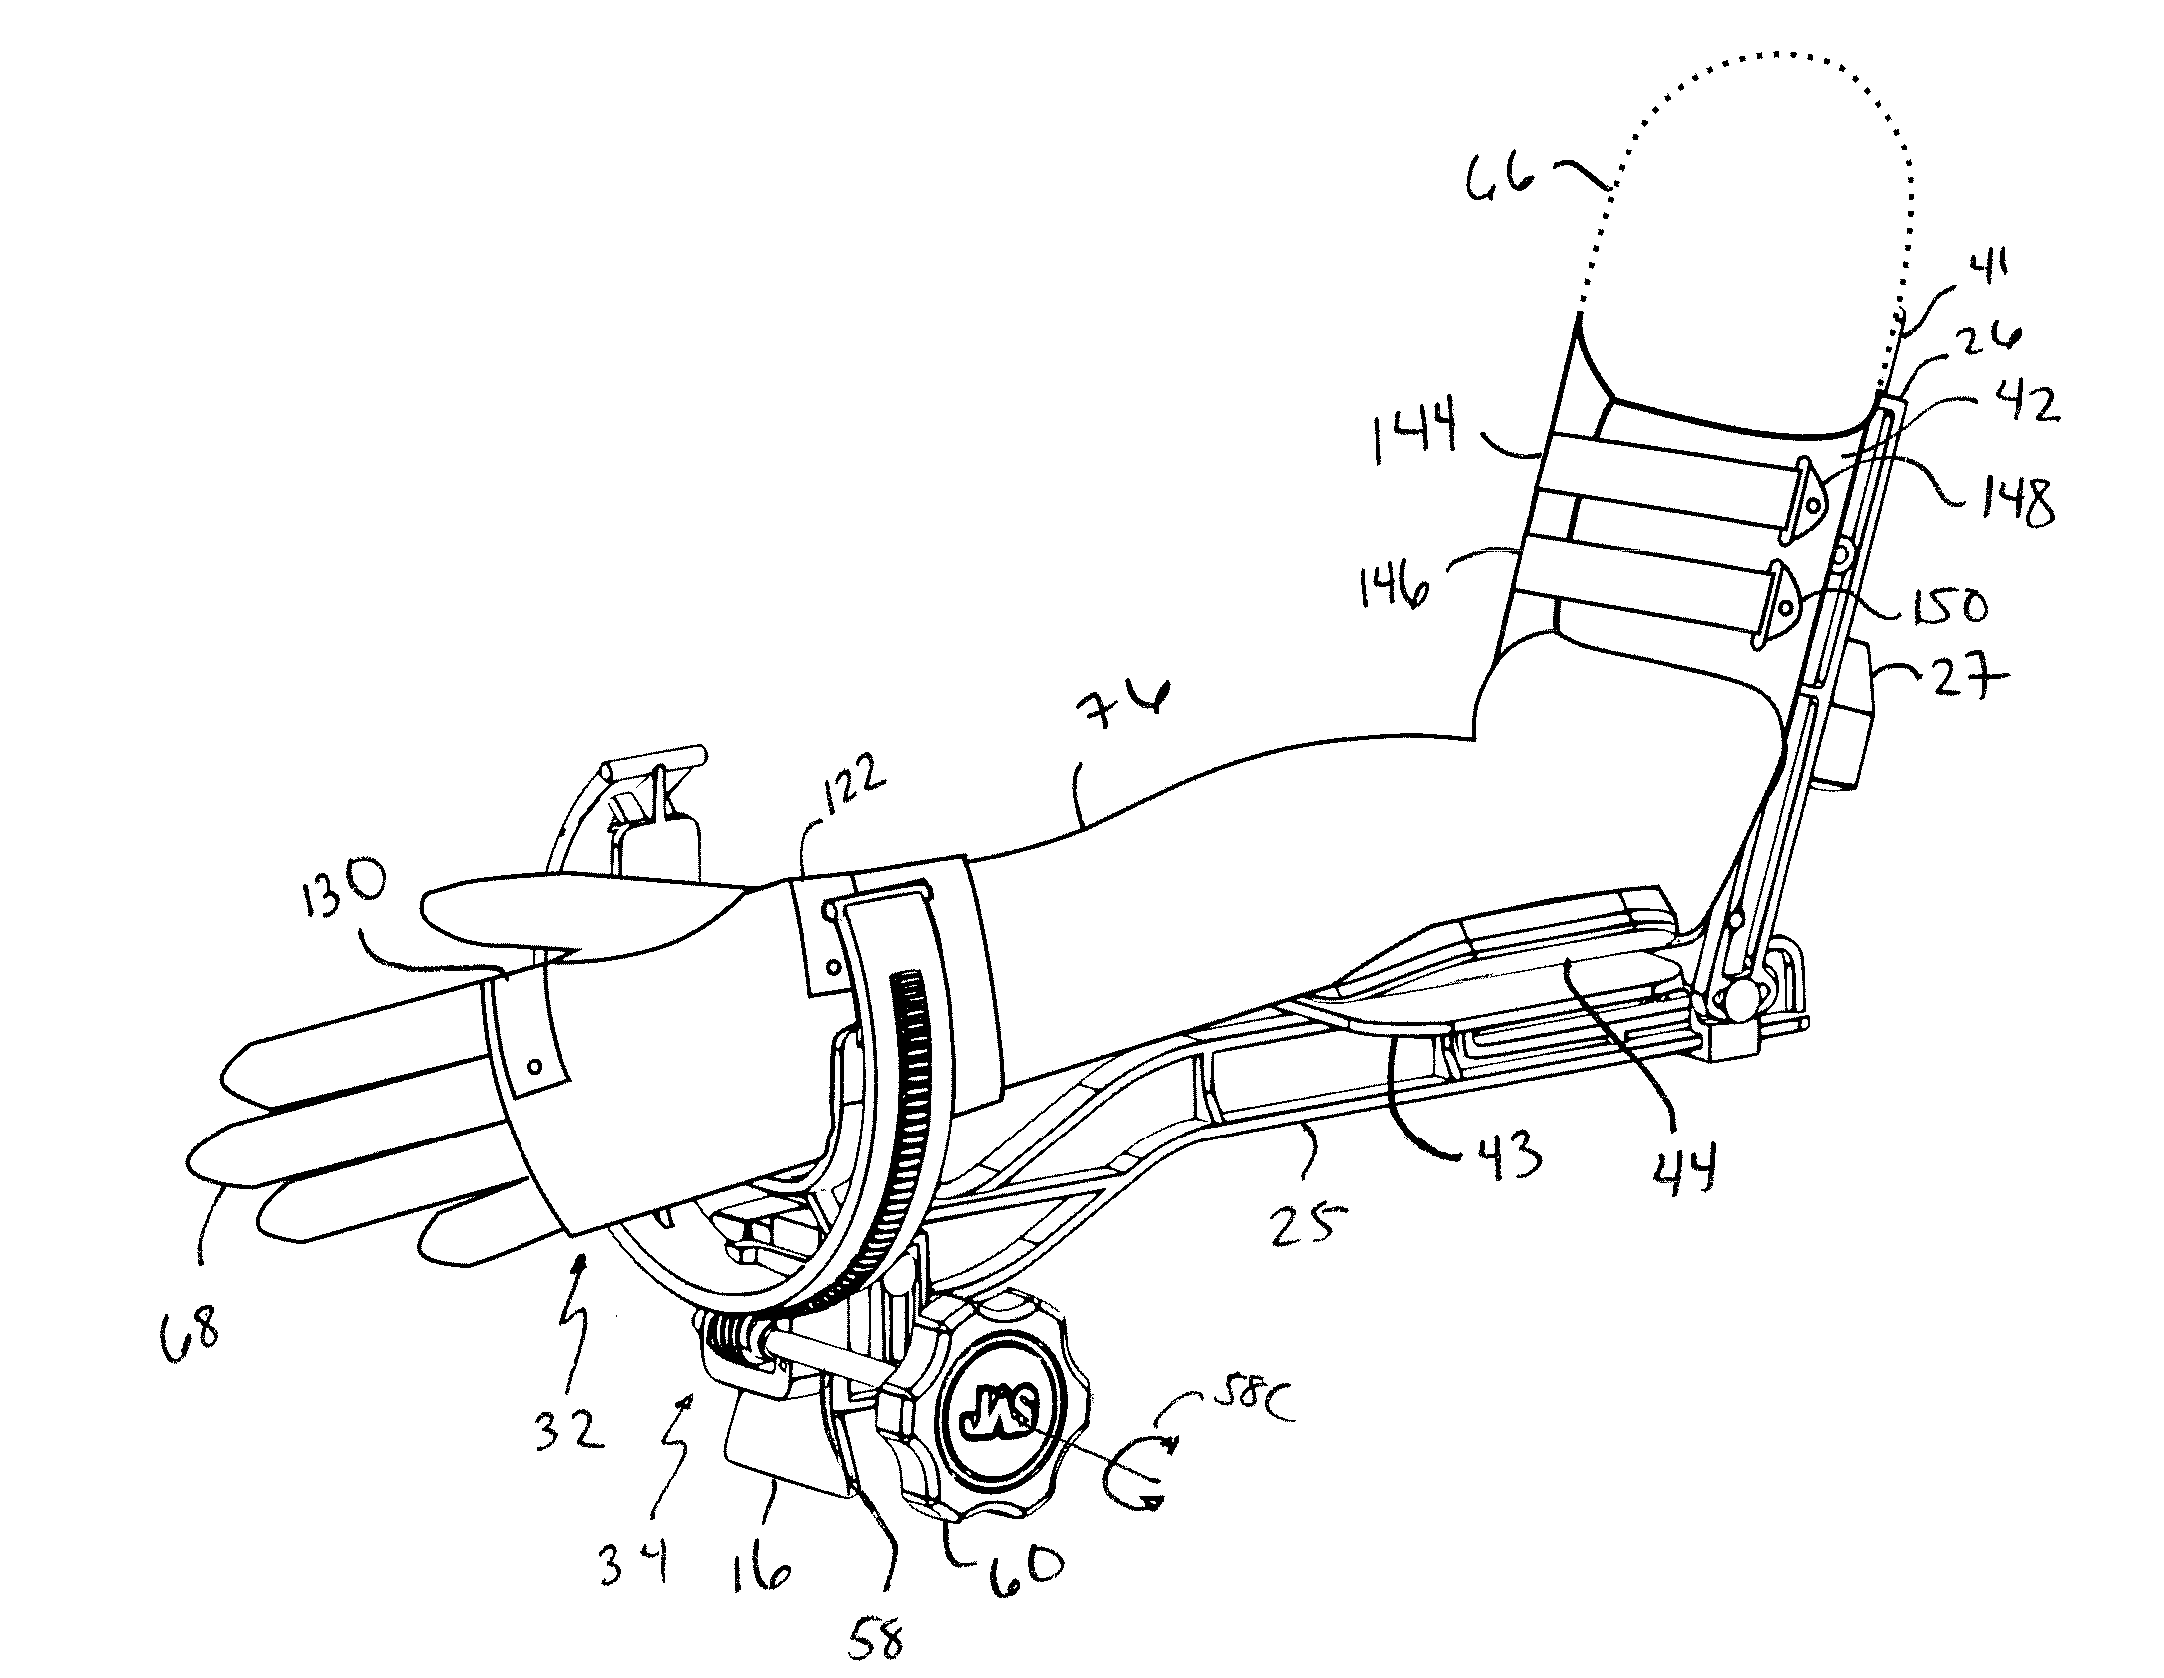 Orthosis Apparatus and Method of Using an Orthosis Apparatus